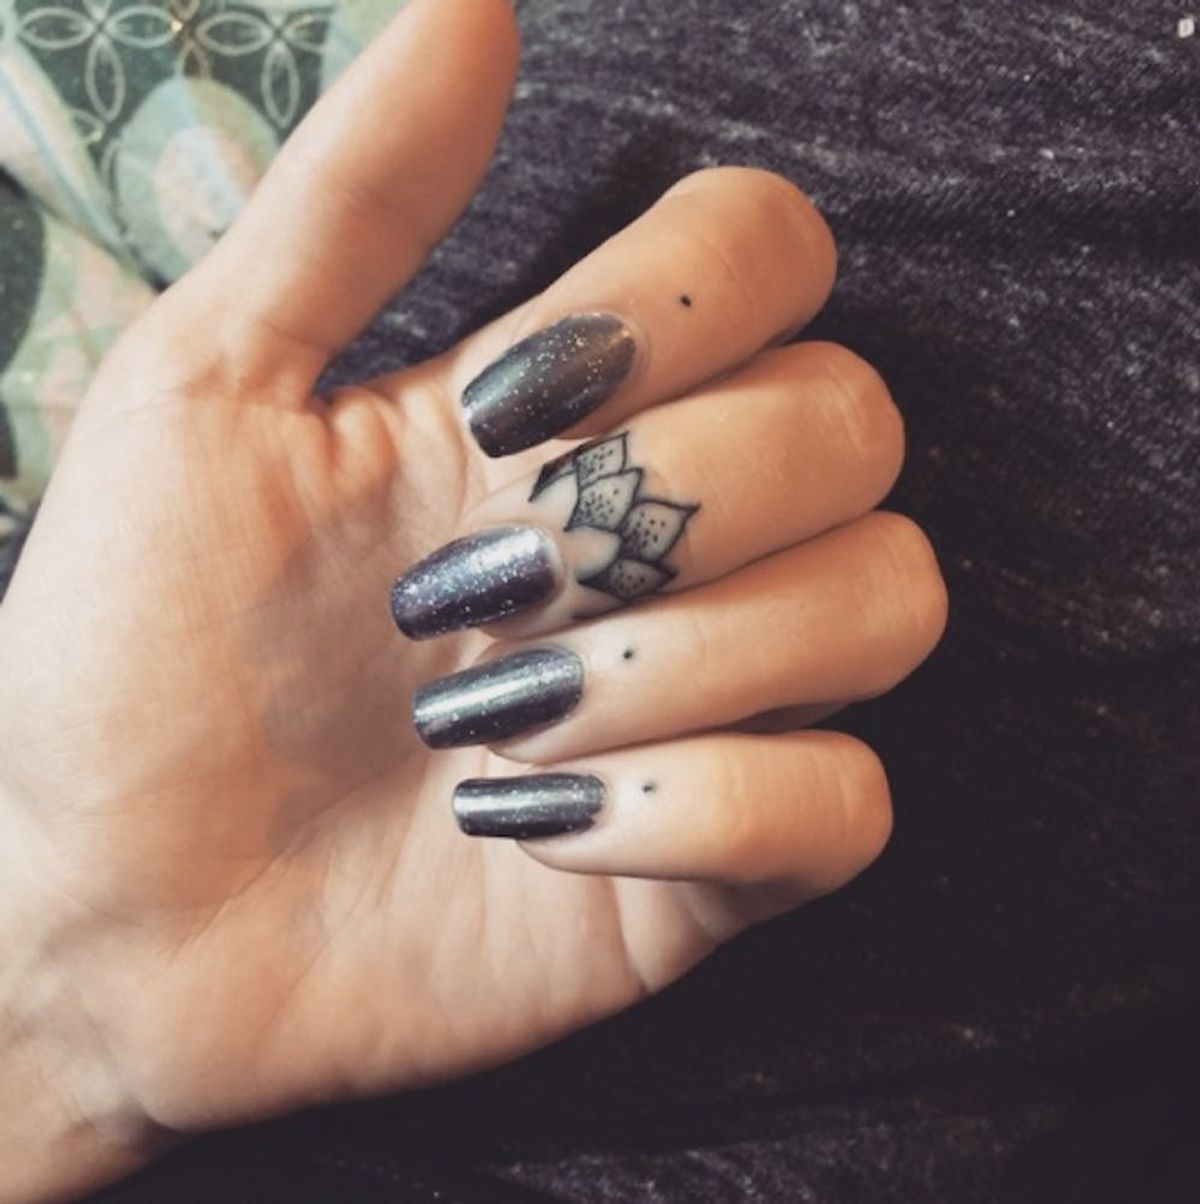 Cuticle Tattoos Are the Unexpected Ink Trend Coming to an Instagram Feed Near You